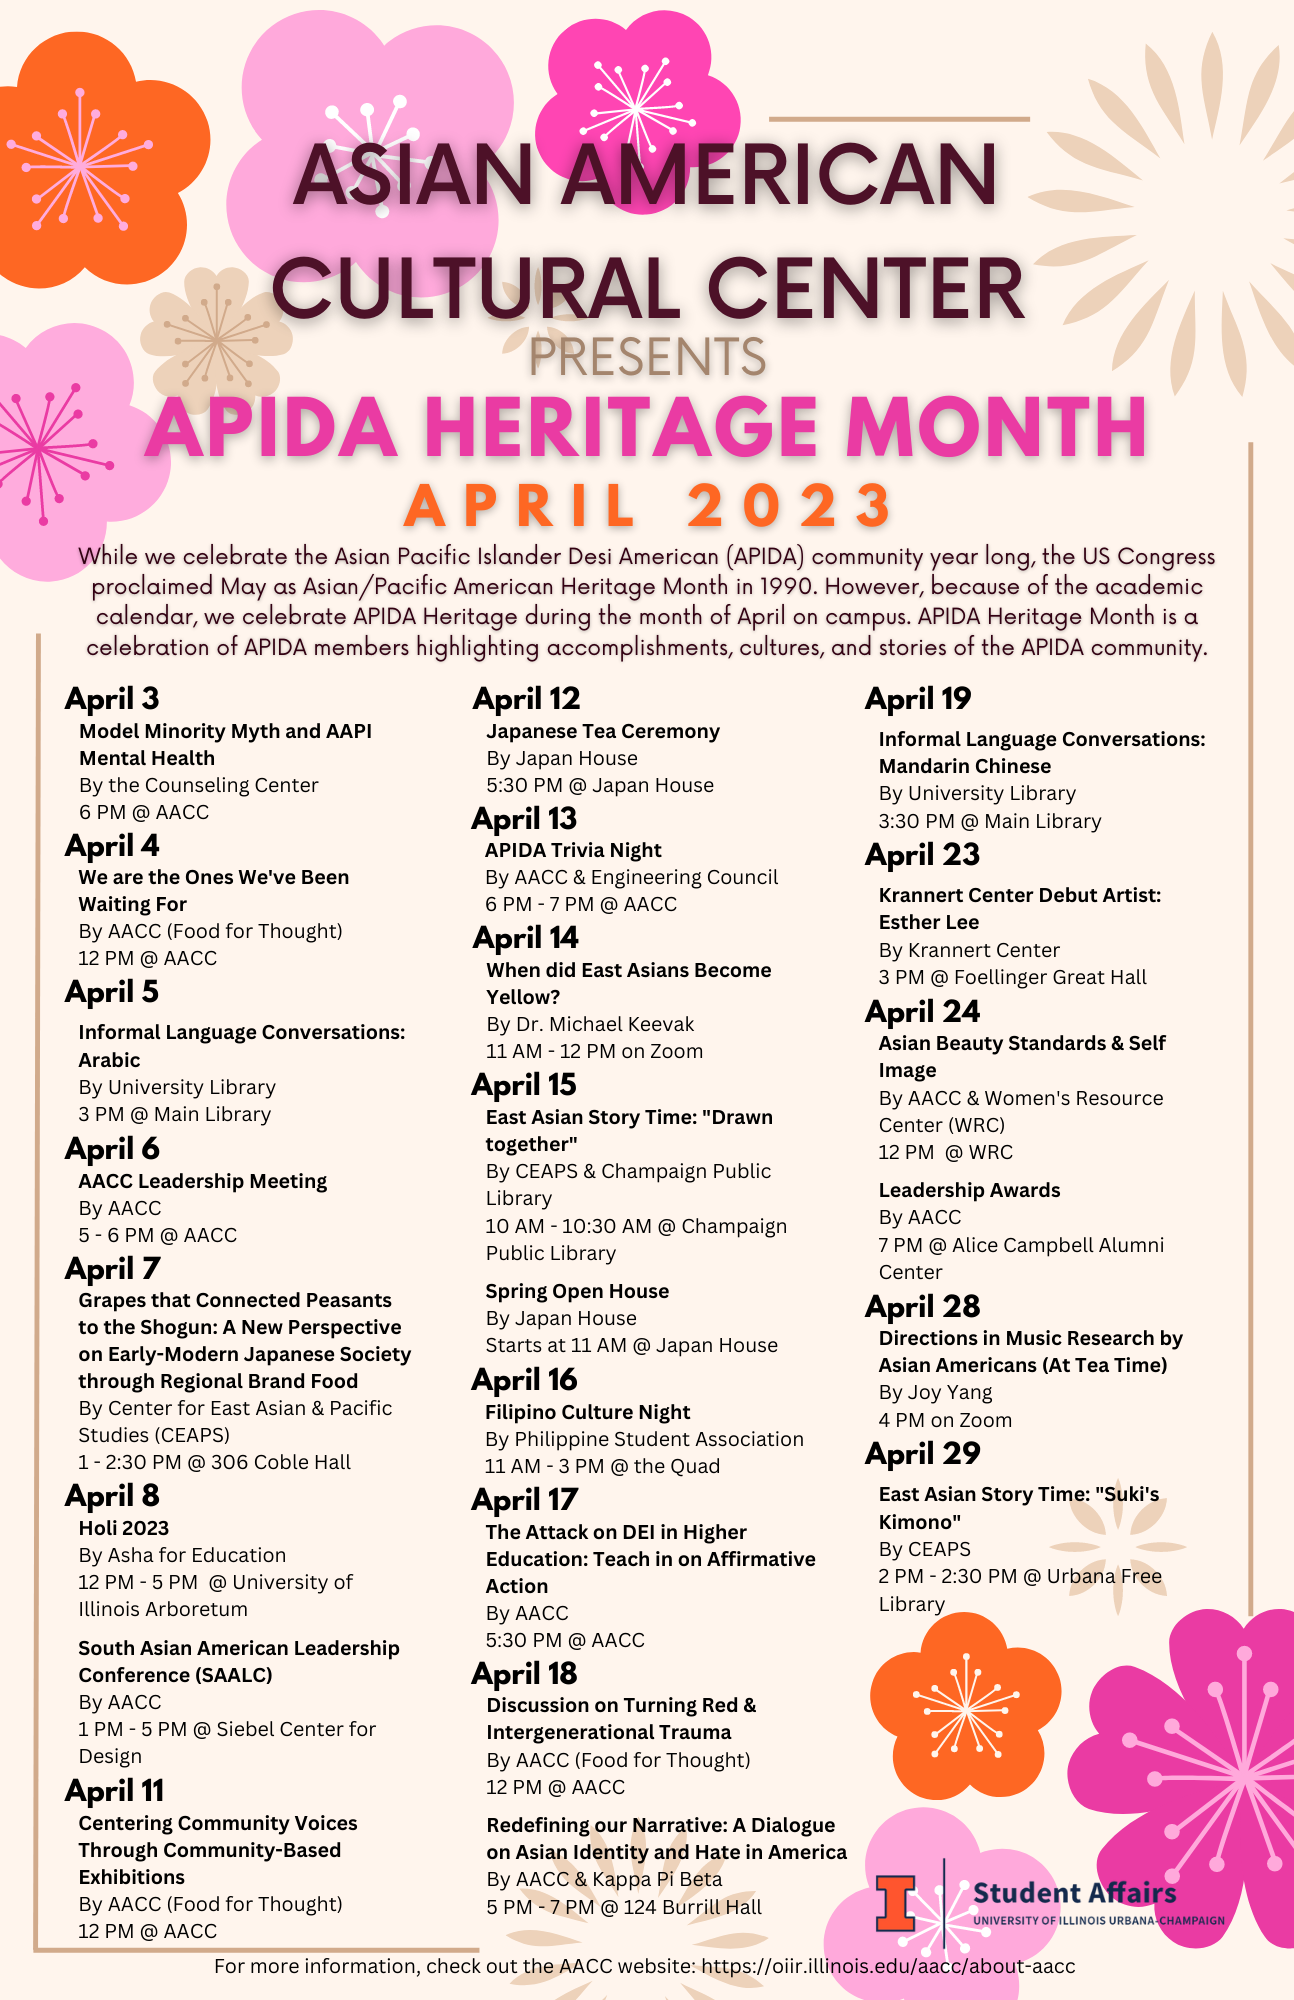 April 2023 APIDA Heritage Month schedule poster including text about the events and orange and pink flower illustrations in the upper left and lower right corners